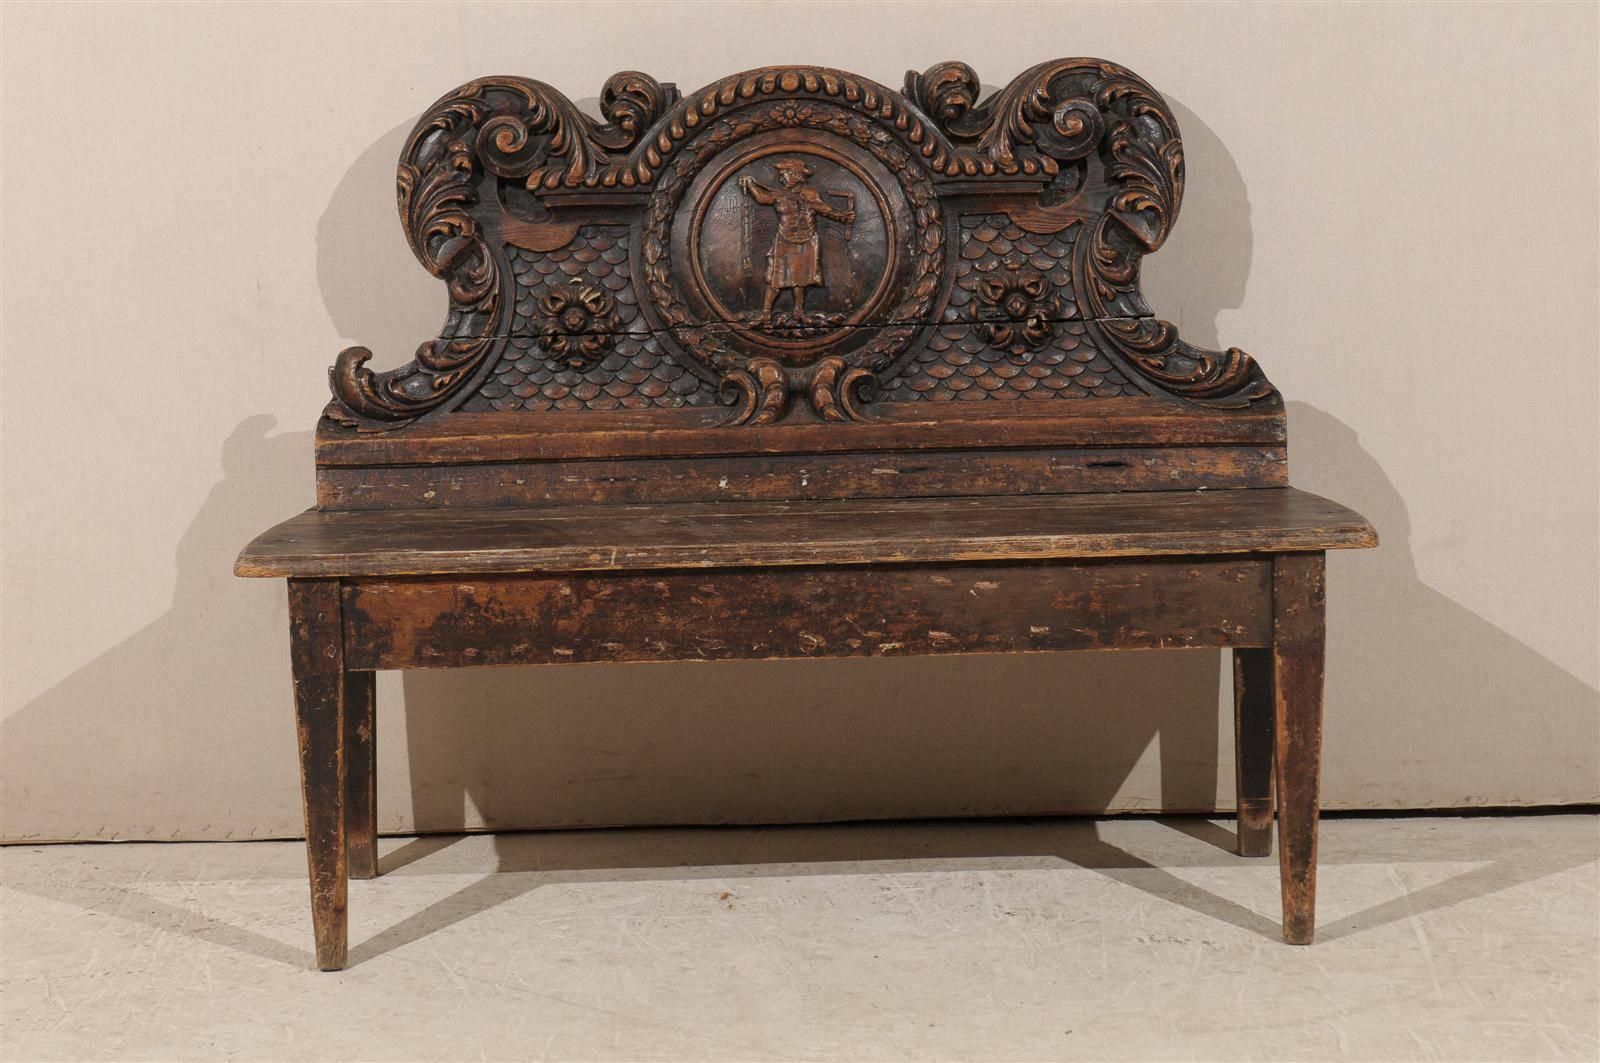 An Italian 18th century pinewood bench with richly carved ornate details. This dark wood Italian bench features a central medallion adorned with a man's figure. Around the central character and medallion are other beautifully carved details such as